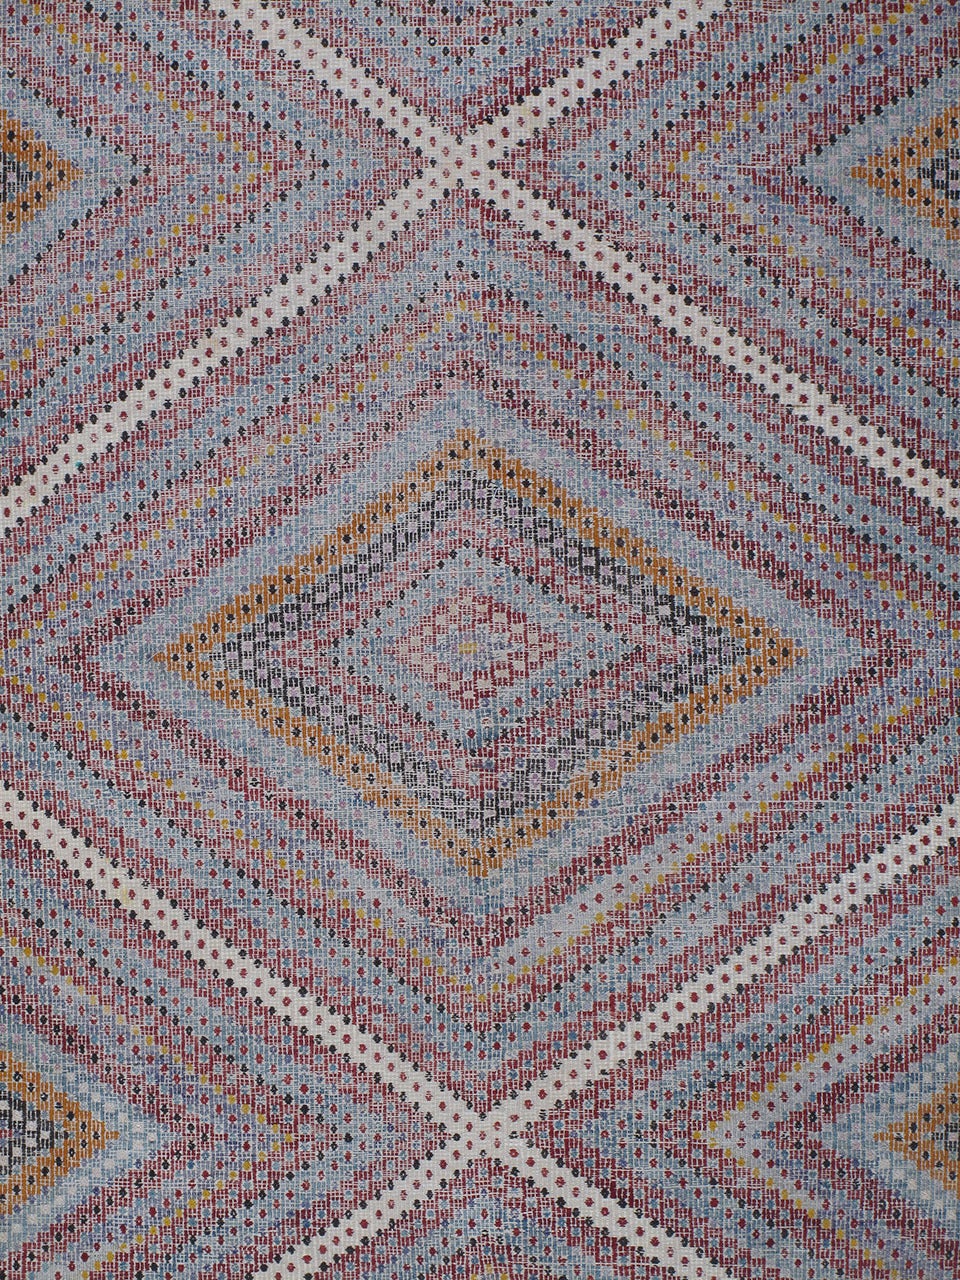 A tribal flat-weave from Western Turkey, woven in the intricate 